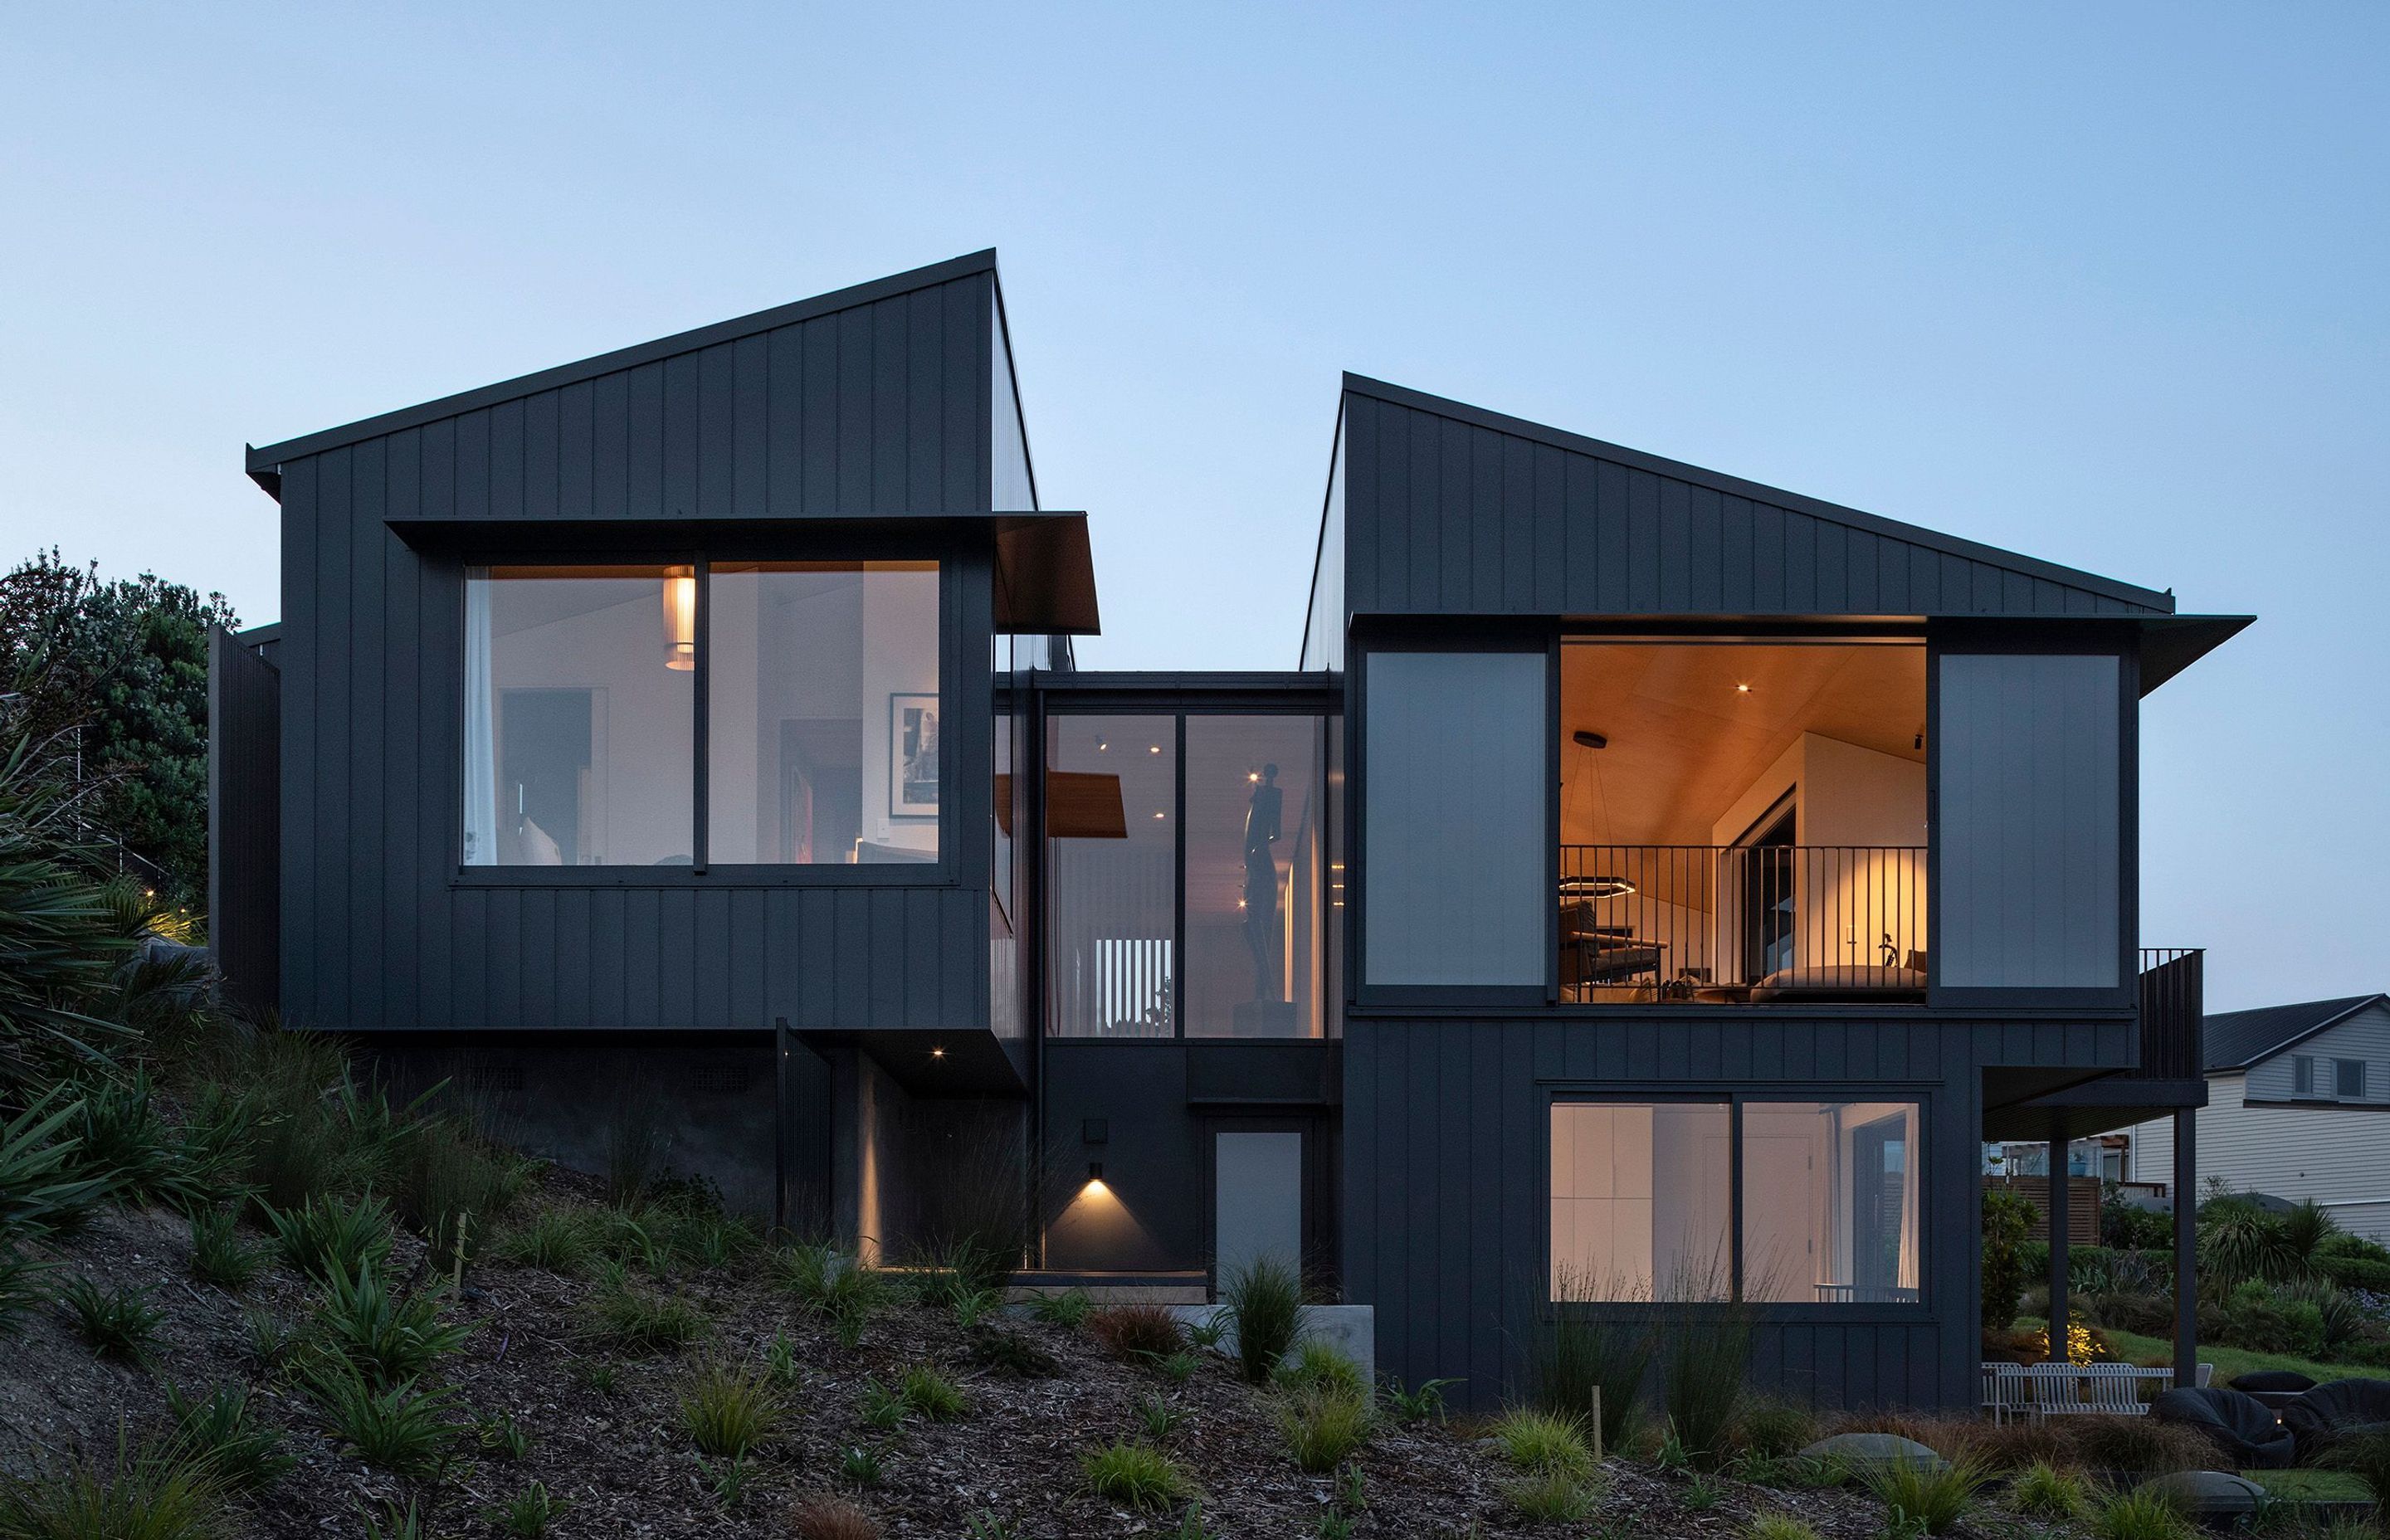 At dusk, the structure of the house seems to recede into the hillside, providing glimpses of the spaces inside.